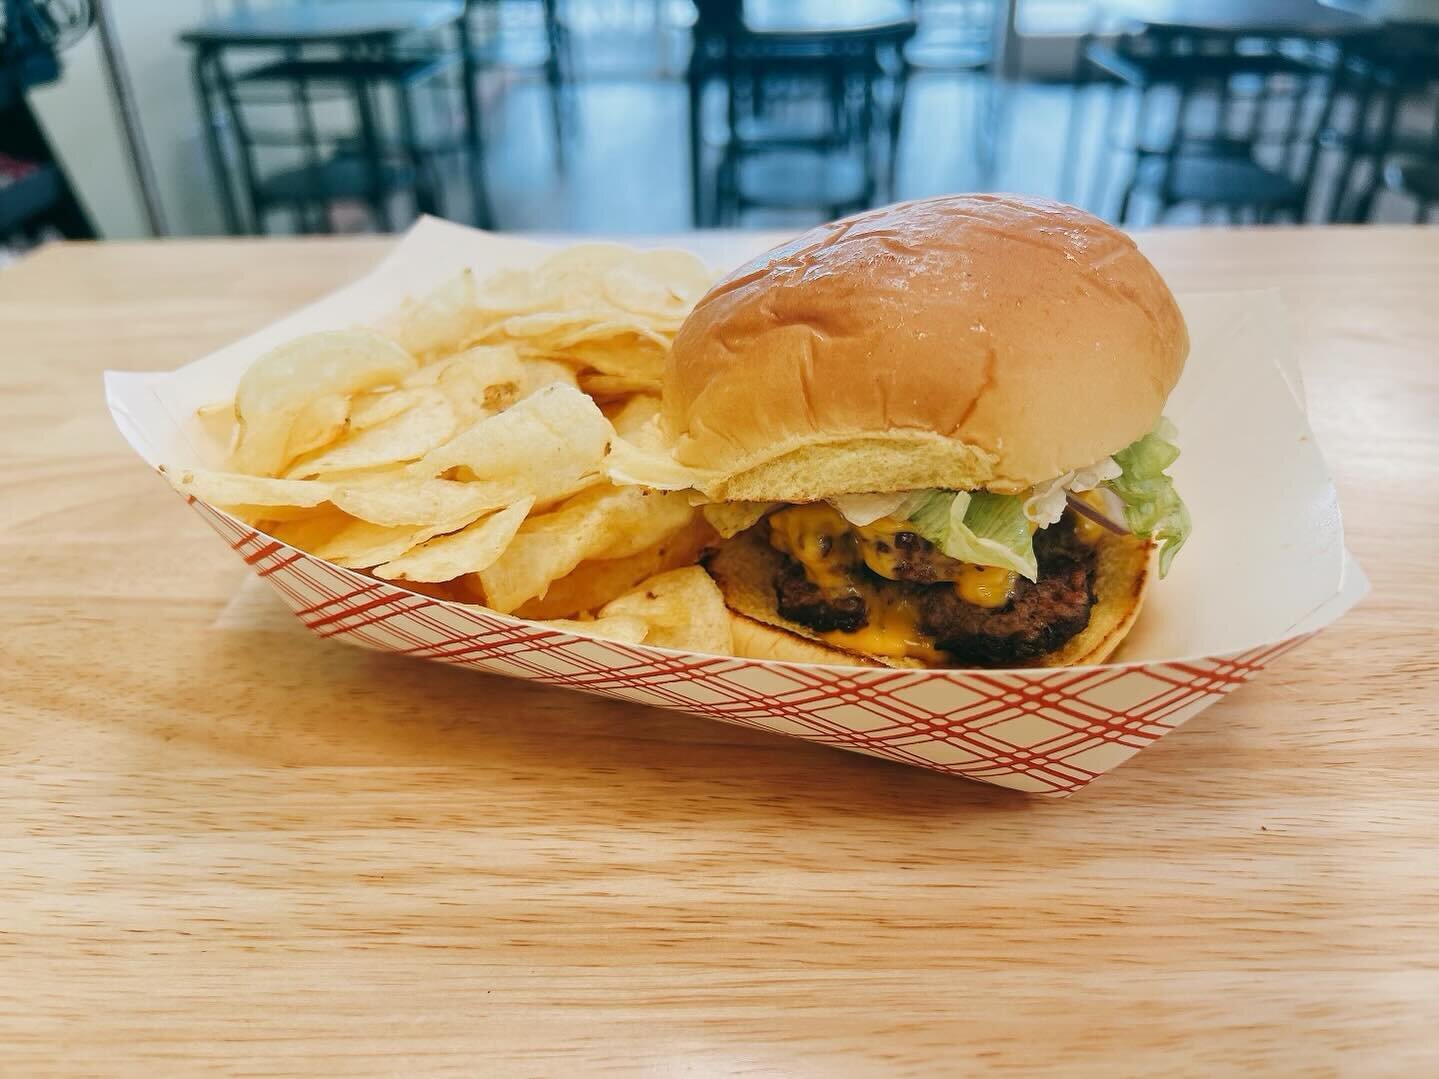 IT&rsquo;S MASH MONDAY! Our delicious Smash Burger and Chips only $7.95 every Monday. Open til 3pm. .
#benandbean #cafe #burger #lunchtime #oceanislebeachnc #sunsetbeachnc #brunswickcountync